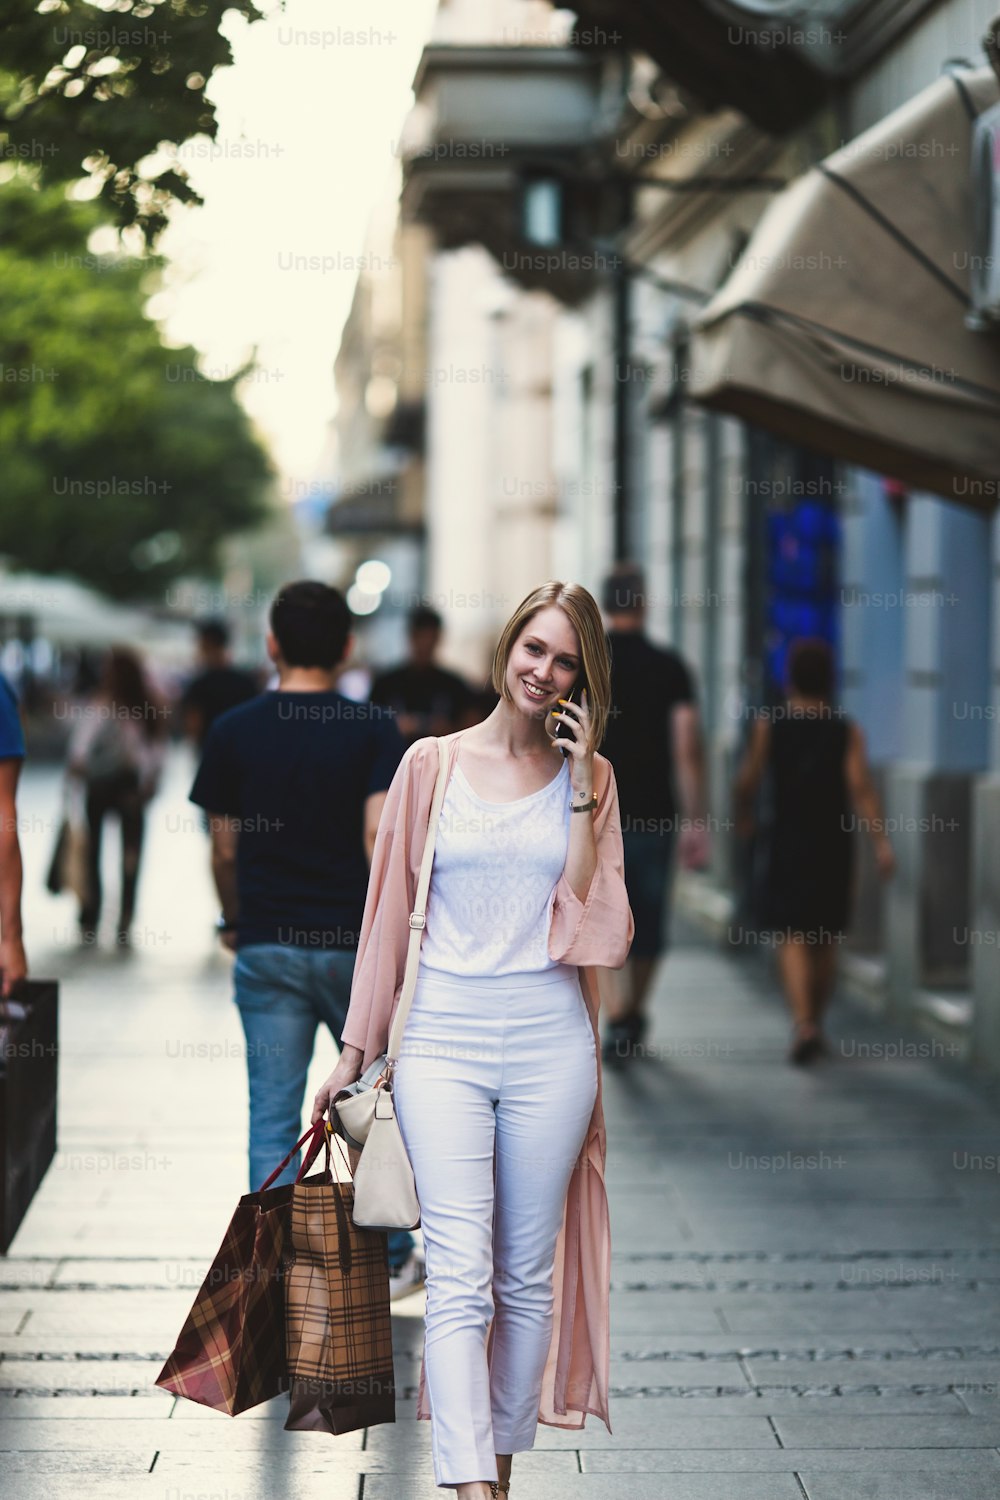 Beautiful and fashionable young woman with shopping bags standing on city street and looking at shopfront